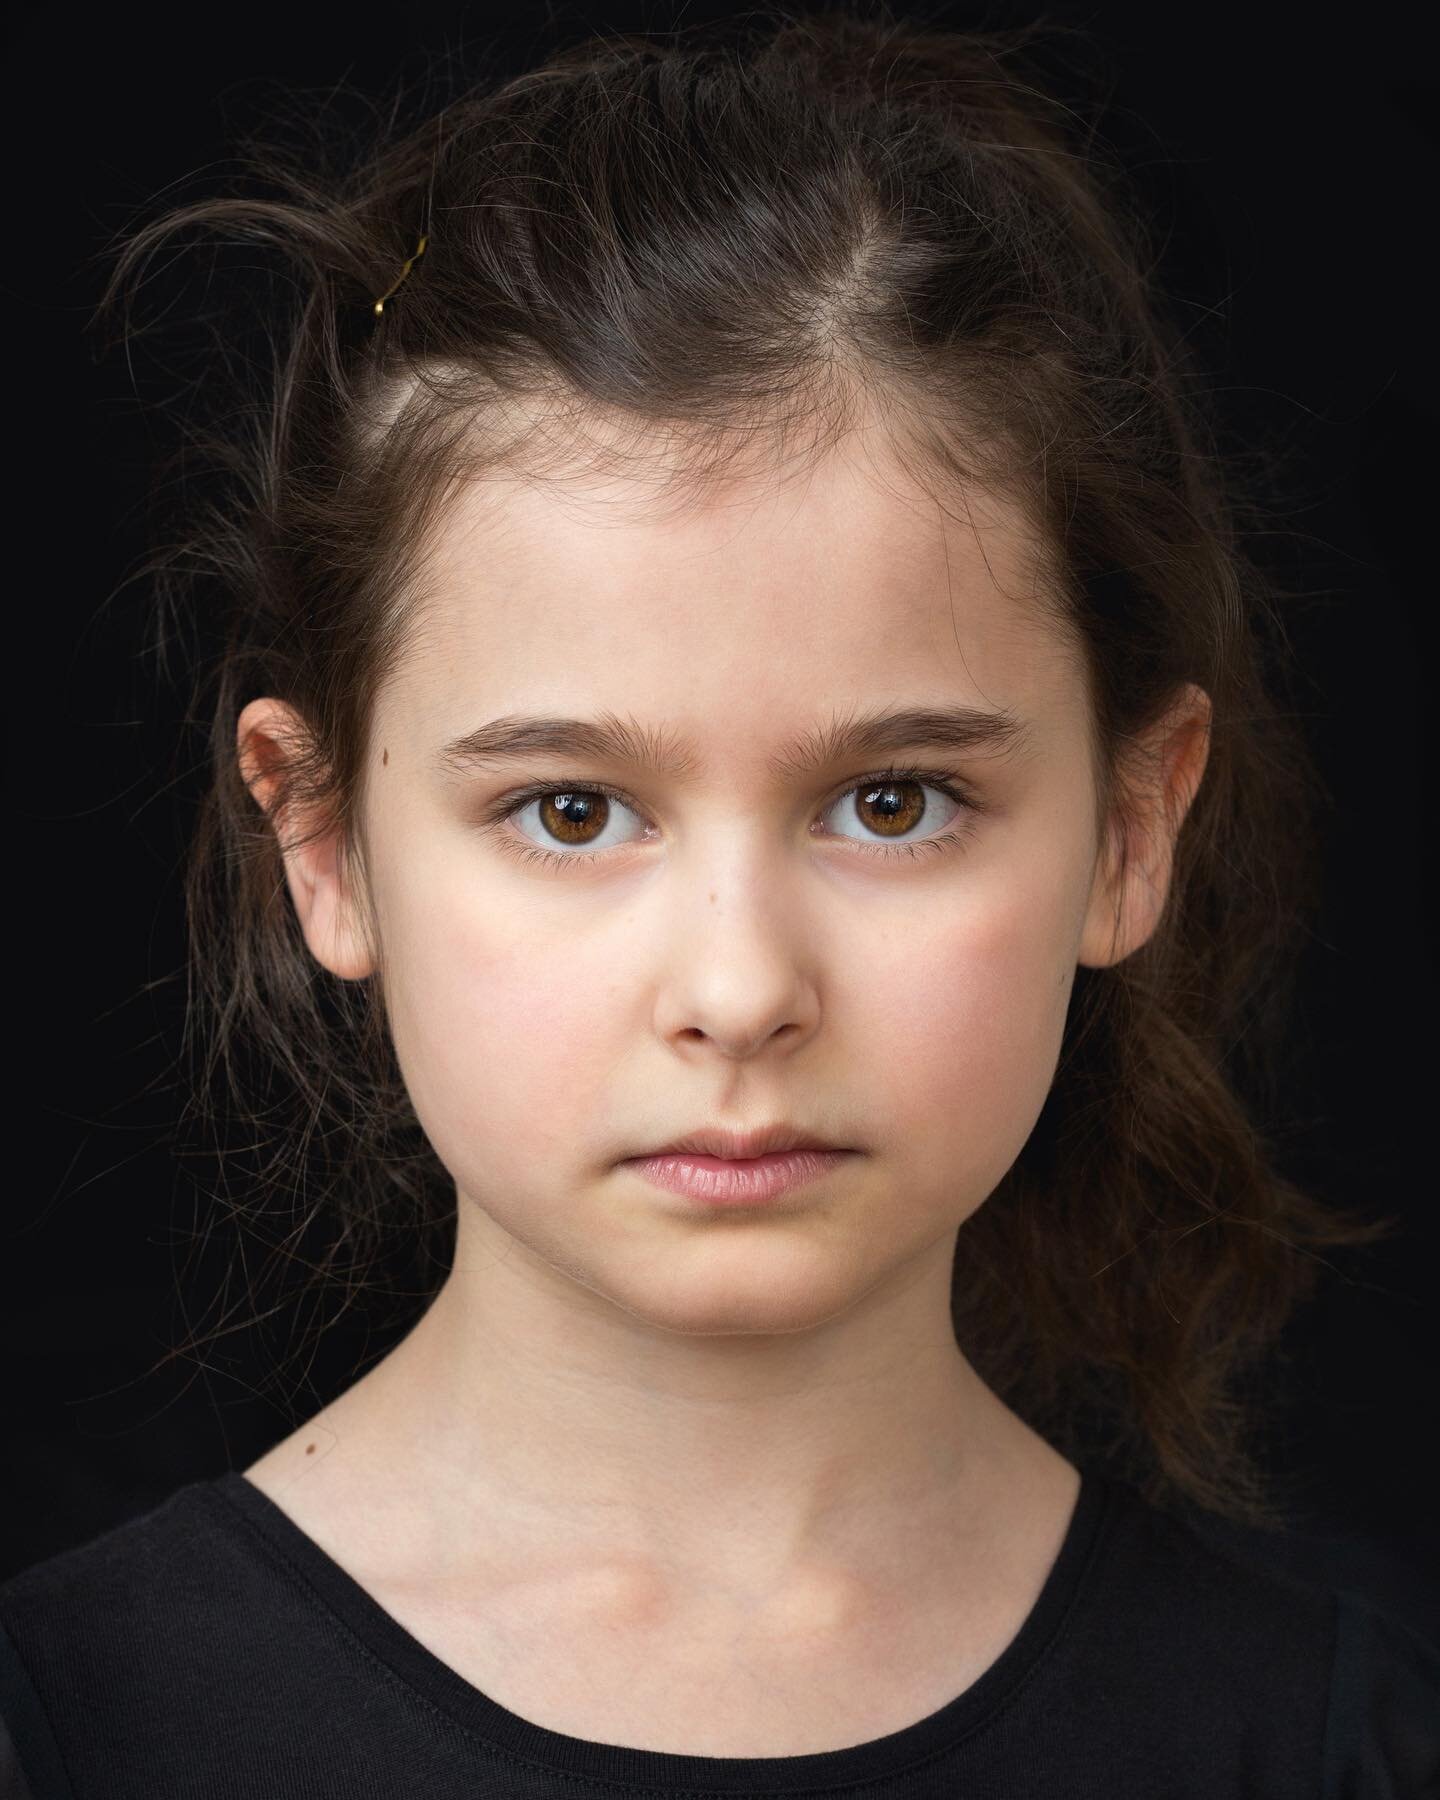 Actor&rsquo;s #headshots for G. She was absolutely wonderful in front of the camera, very #characterful and able to show many different #emotions. A star in the making 🌟 

This #portrait, selected by her mum and dad, is one of my favourites too. Tho